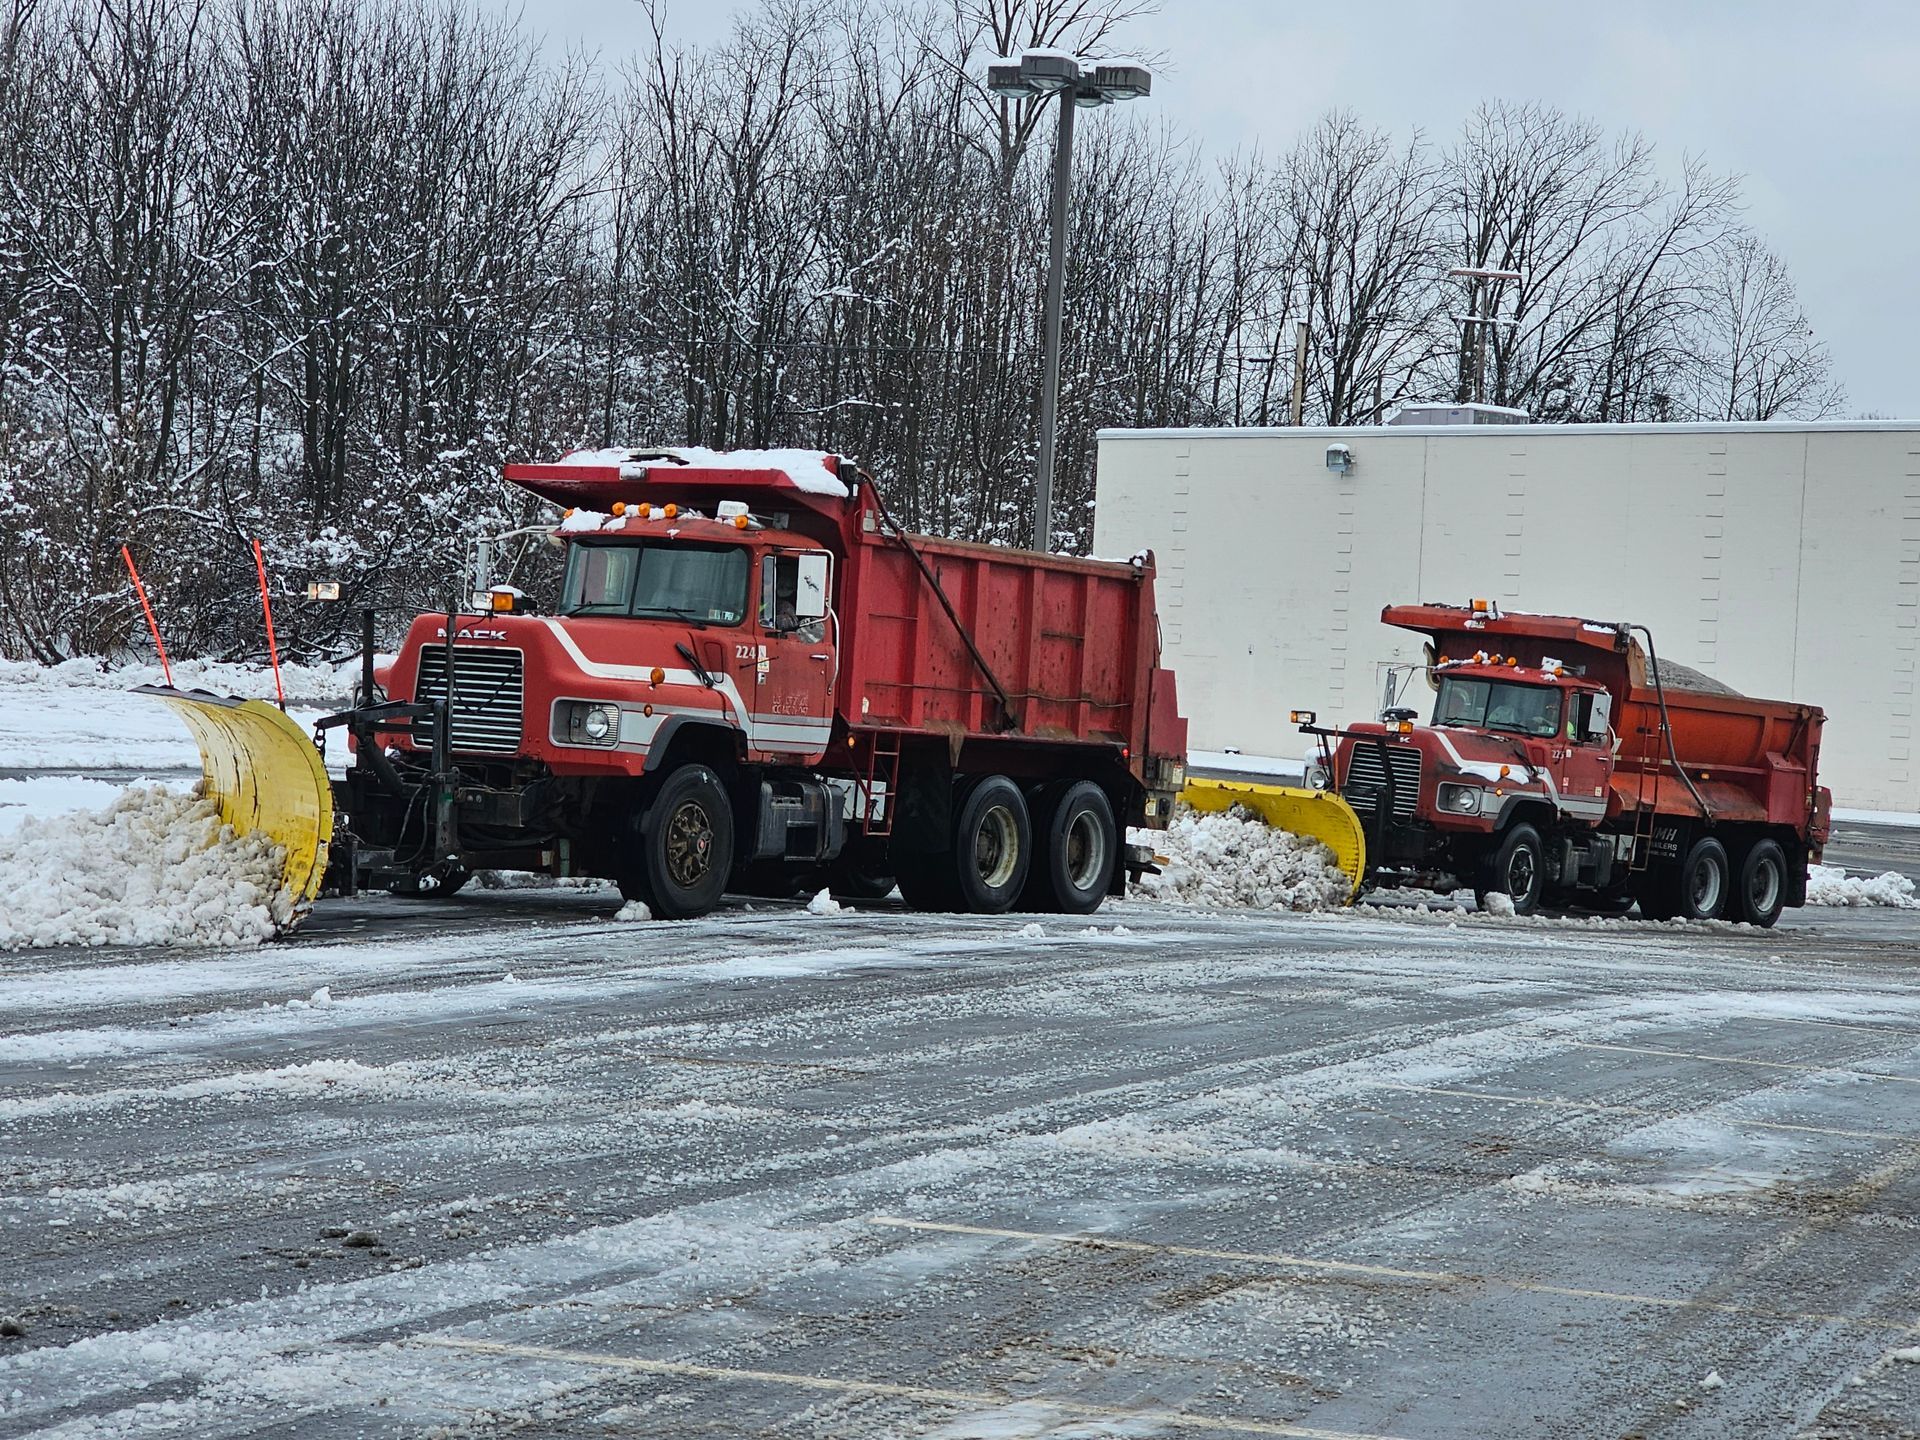 DVC uses their trucks to plow parking lots.